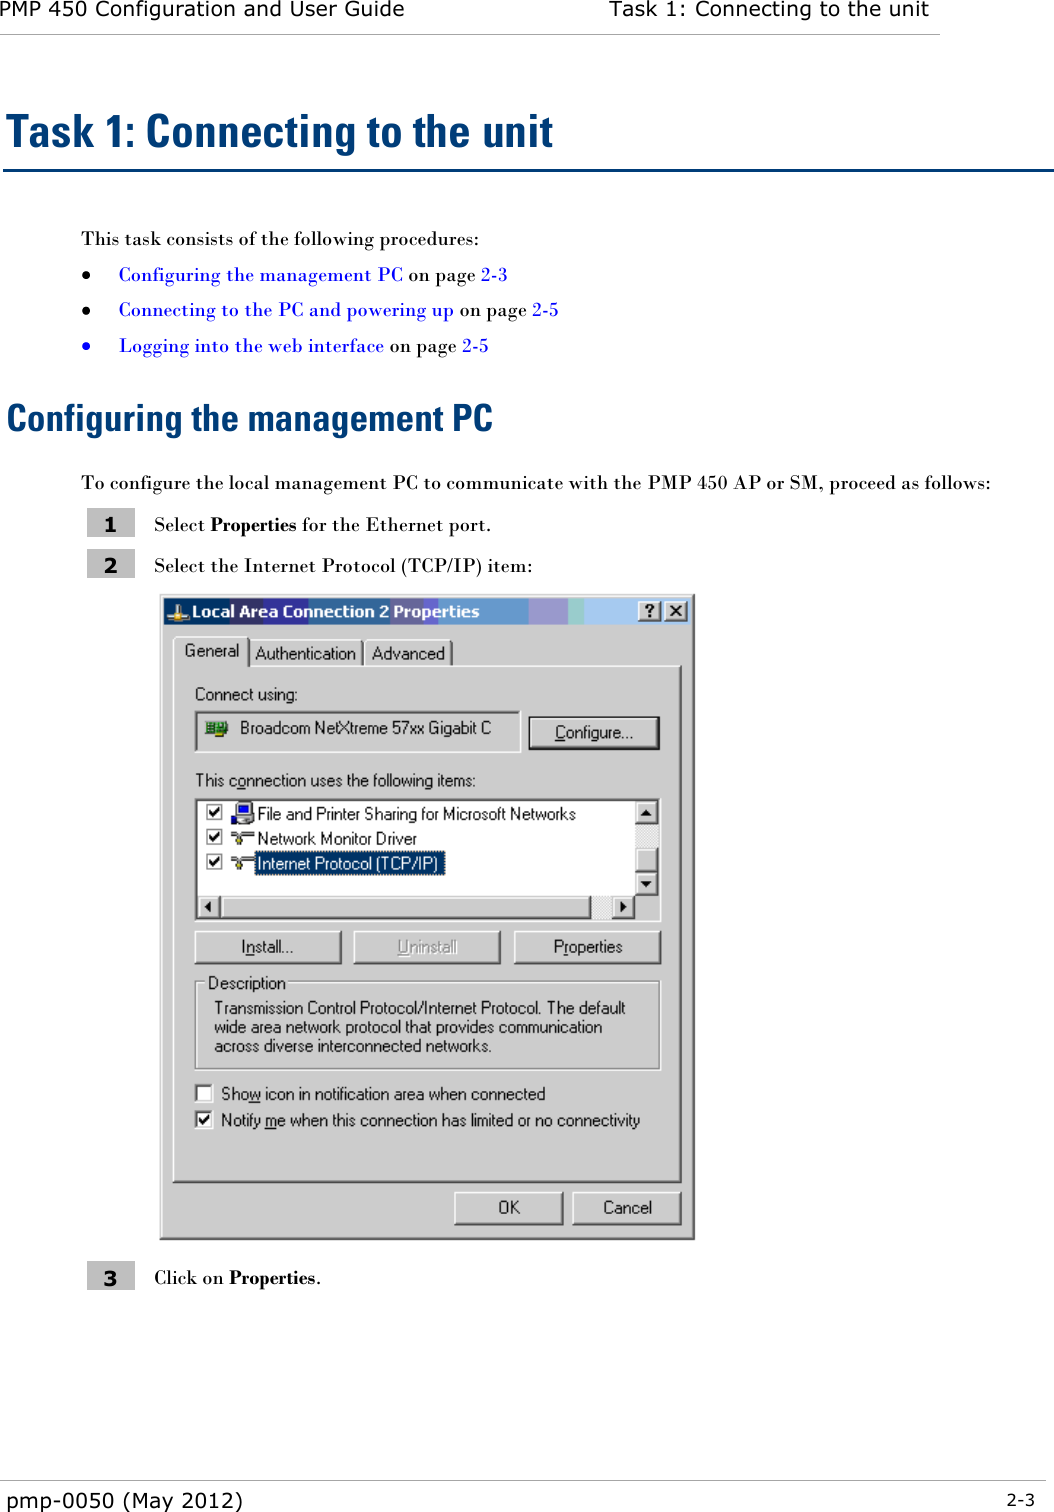 PMP 450 Configuration and User Guide Task 1: Connecting to the unit  pmp-0050 (May 2012)  2-3  Task 1: Connecting to the unit This task consists of the following procedures:  Configuring the management PC on page 2-3  Connecting to the PC and powering up on page 2-5  Logging into the web interface on page 2-5 Configuring the management PC To configure the local management PC to communicate with the PMP 450 AP or SM, proceed as follows: 1 Select Properties for the Ethernet port. 2 Select the Internet Protocol (TCP/IP) item:  3 Click on Properties. 